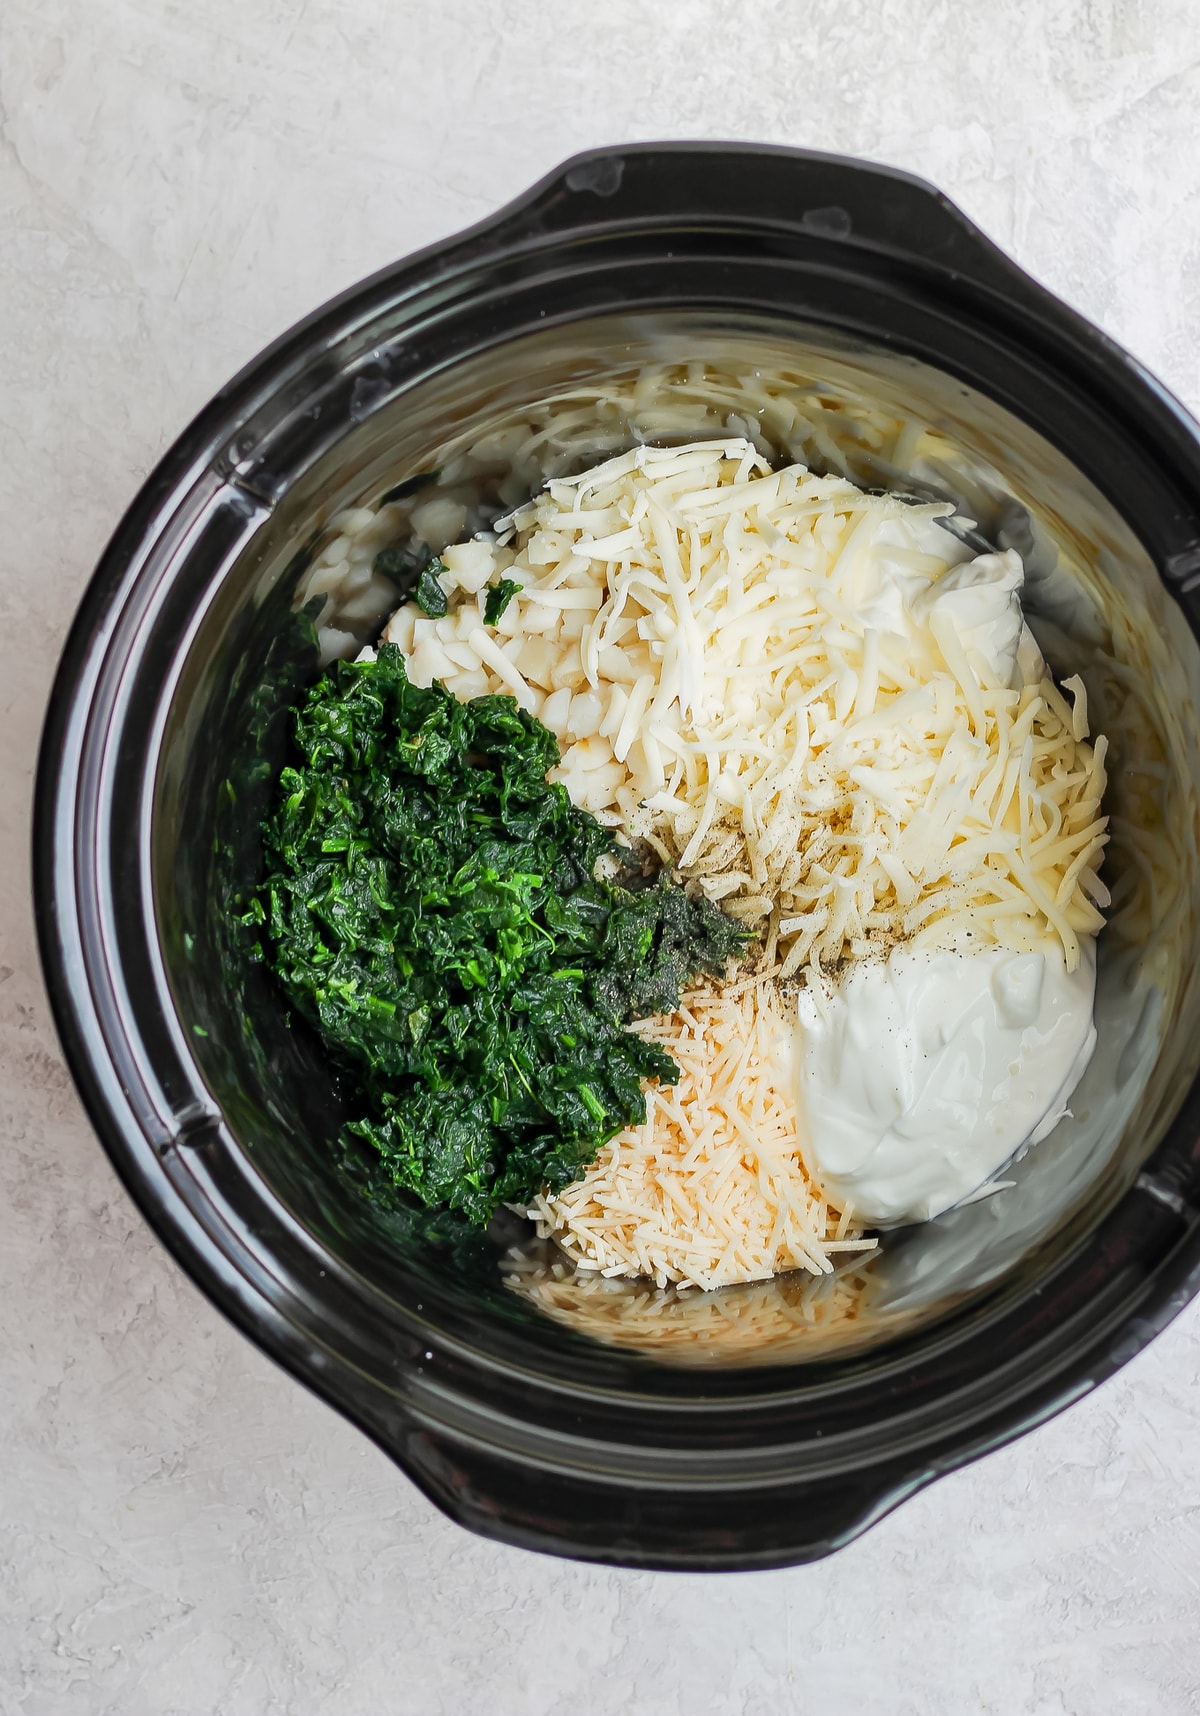 crockpot filled with spinach, cheese, and other ingredients